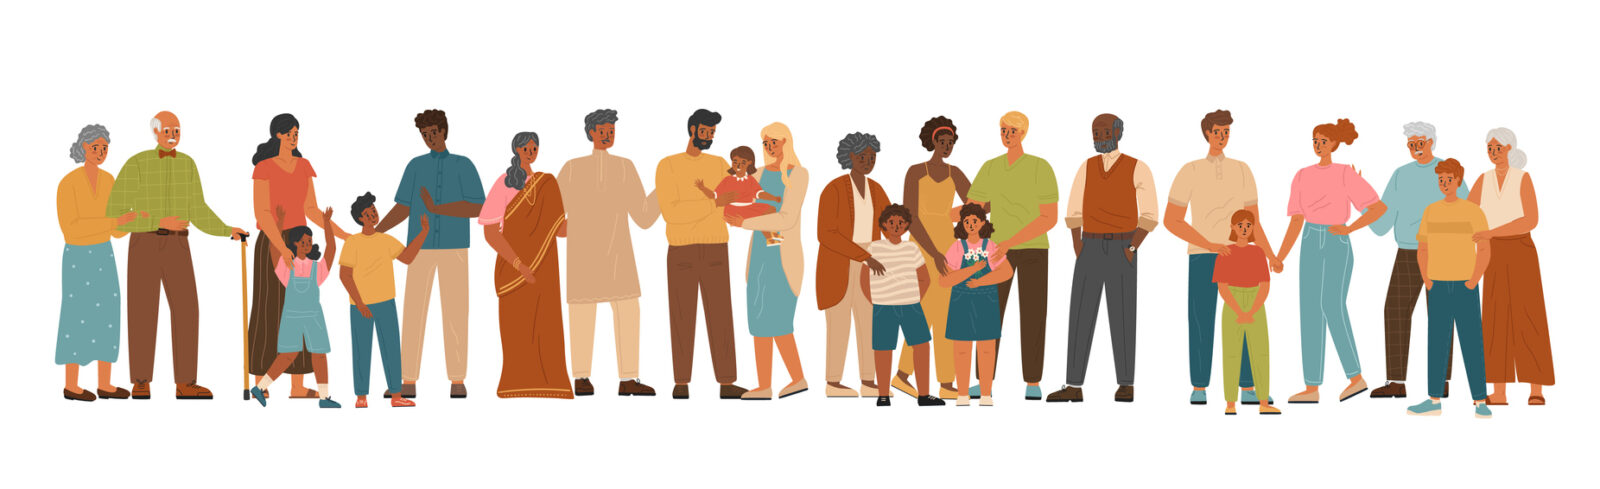 illustration of multicultural group of people